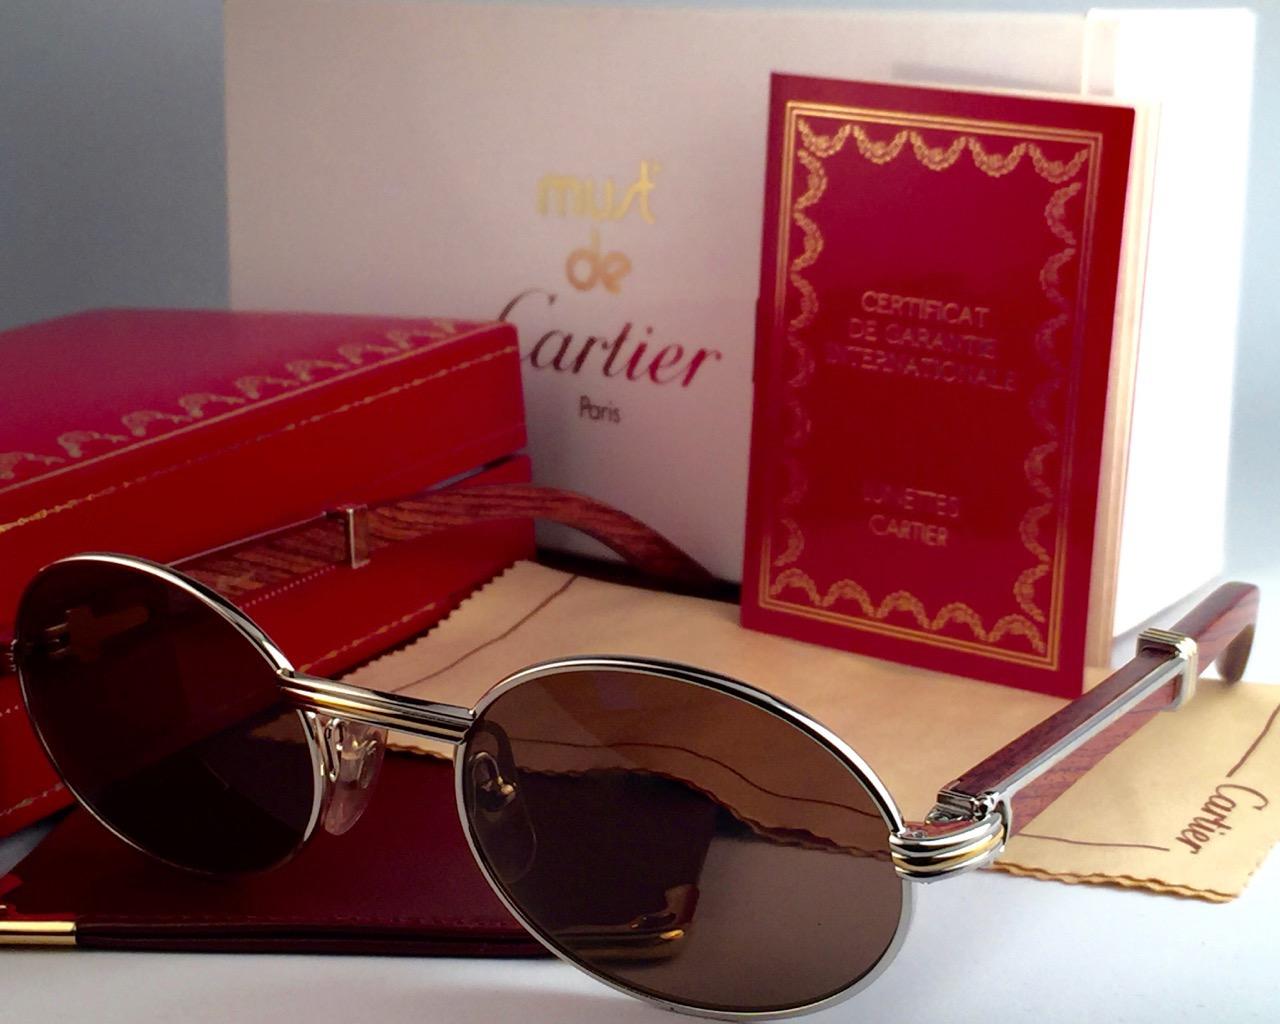 New and very rare original 1992 Cartier Giverny full platinum sunglasses with rosewood temples and brown (uv protection) lenses. 
Frame with the front and sides in platinum.
All hallmarks. 
Gold cartier signs on the ear paddles. Both arms sport the